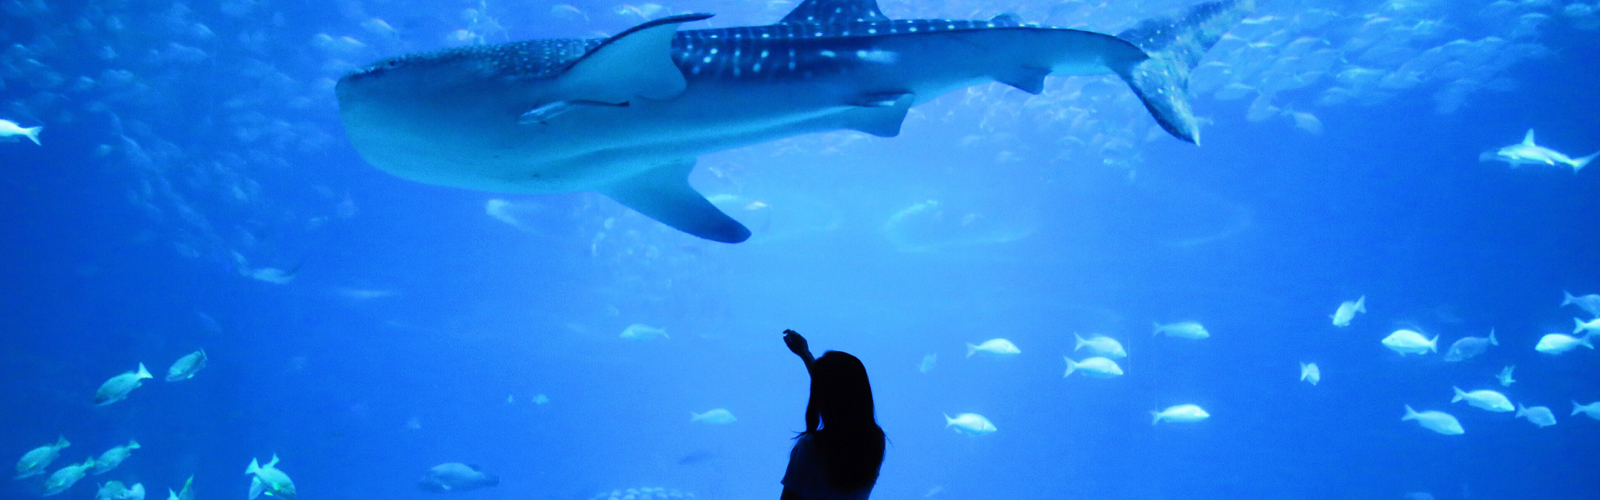 silhoutte of female in front of an aquarium  of fish reaching out to touch shark